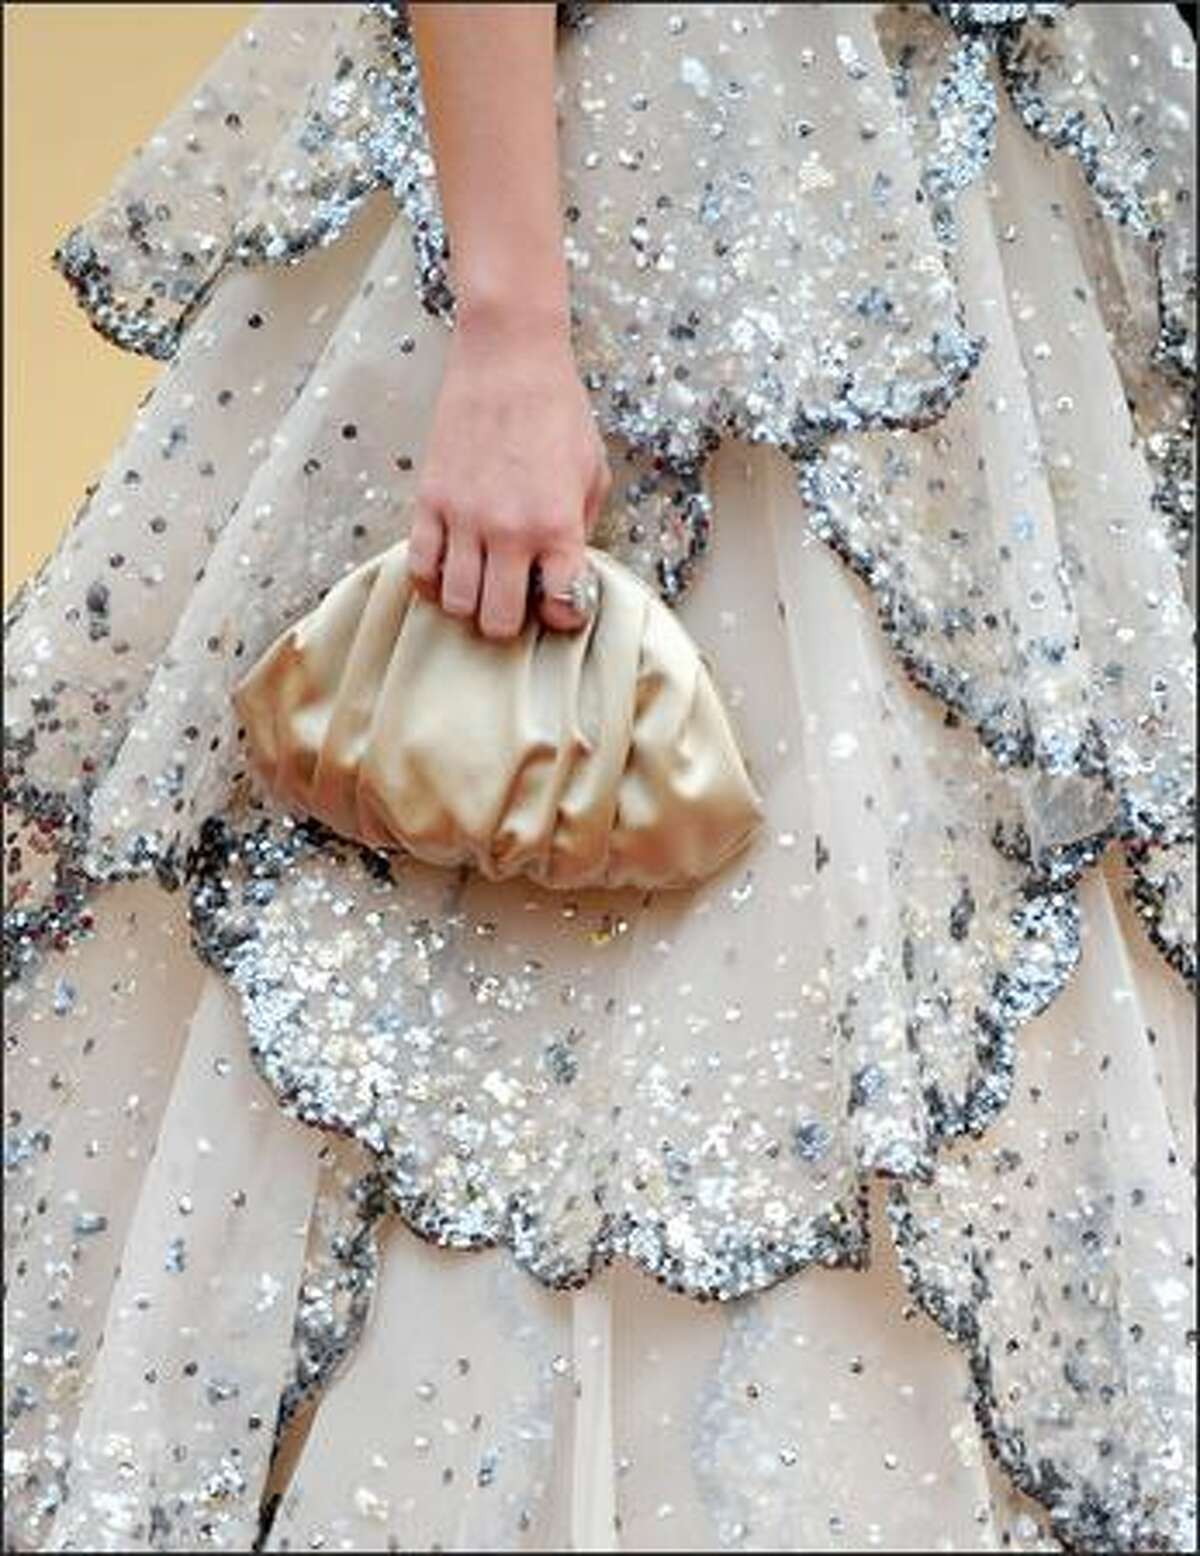 She had the perfect clutch to go with it as well.